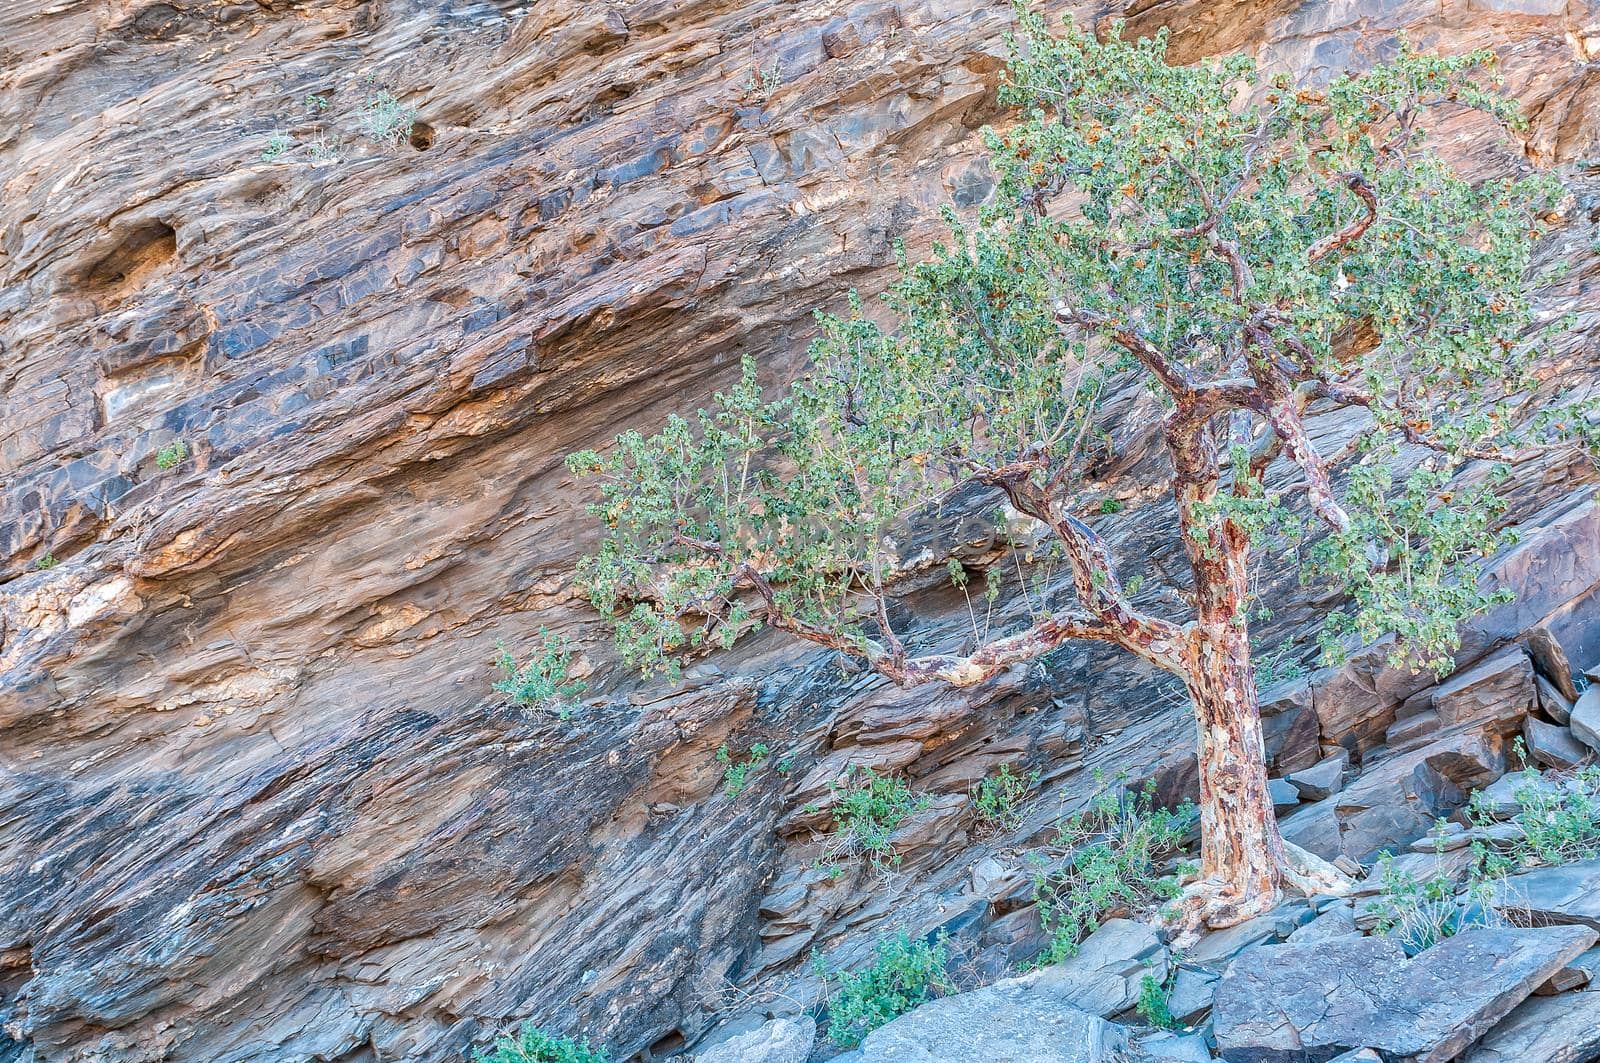 A tree on a rocky slope in the Kuiseb Canyon in Namibia